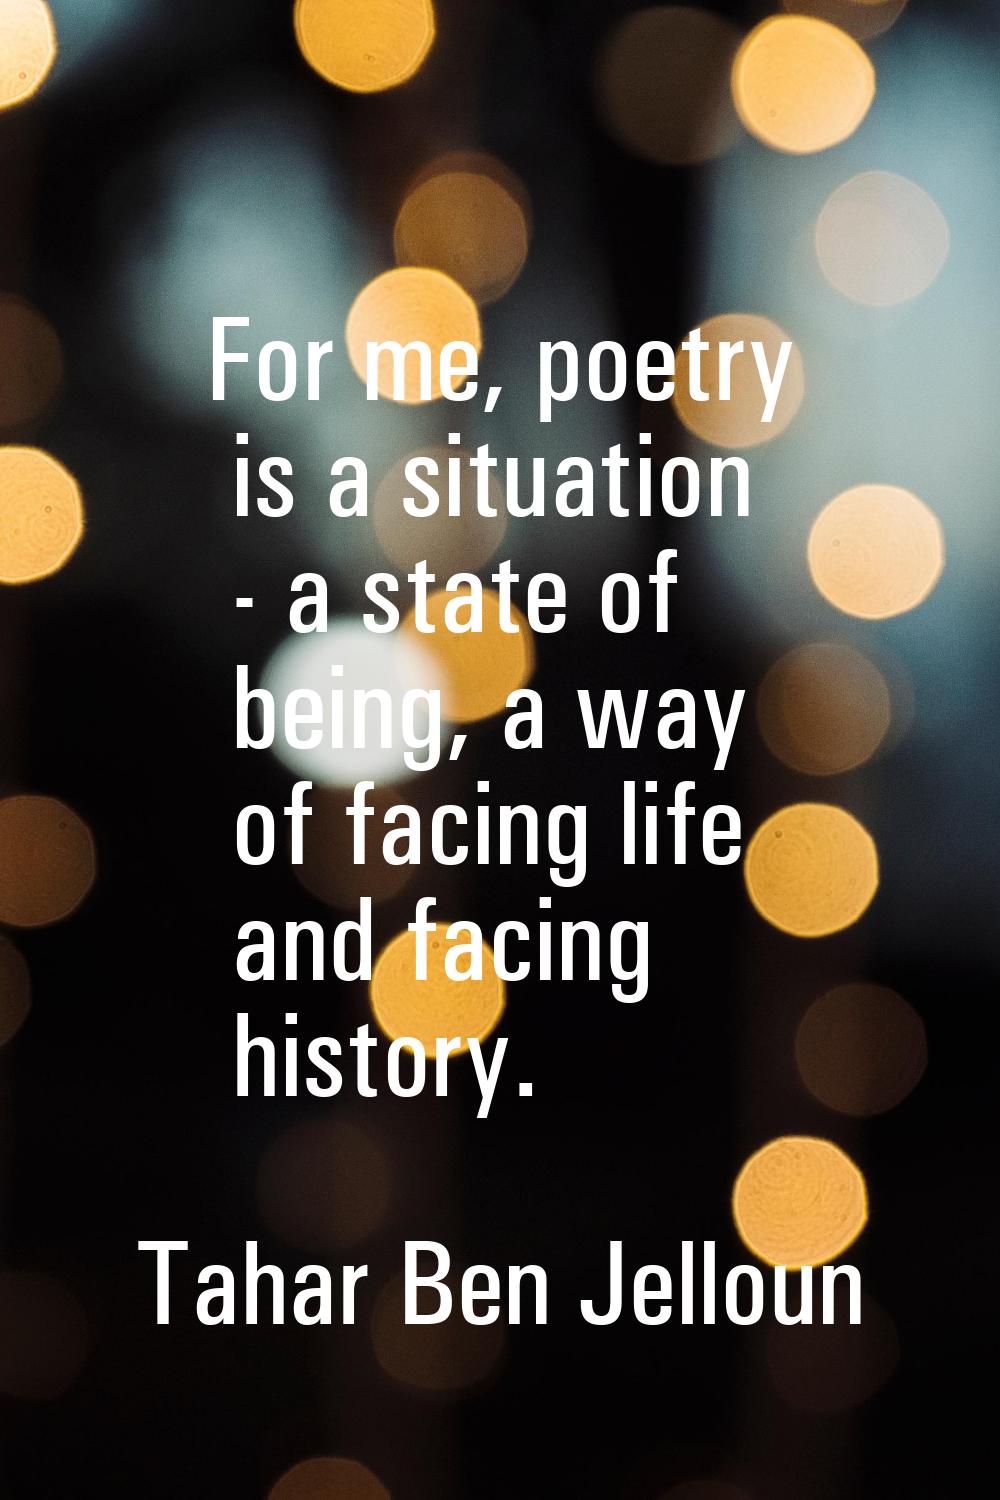 For me, poetry is a situation - a state of being, a way of facing life and facing history.